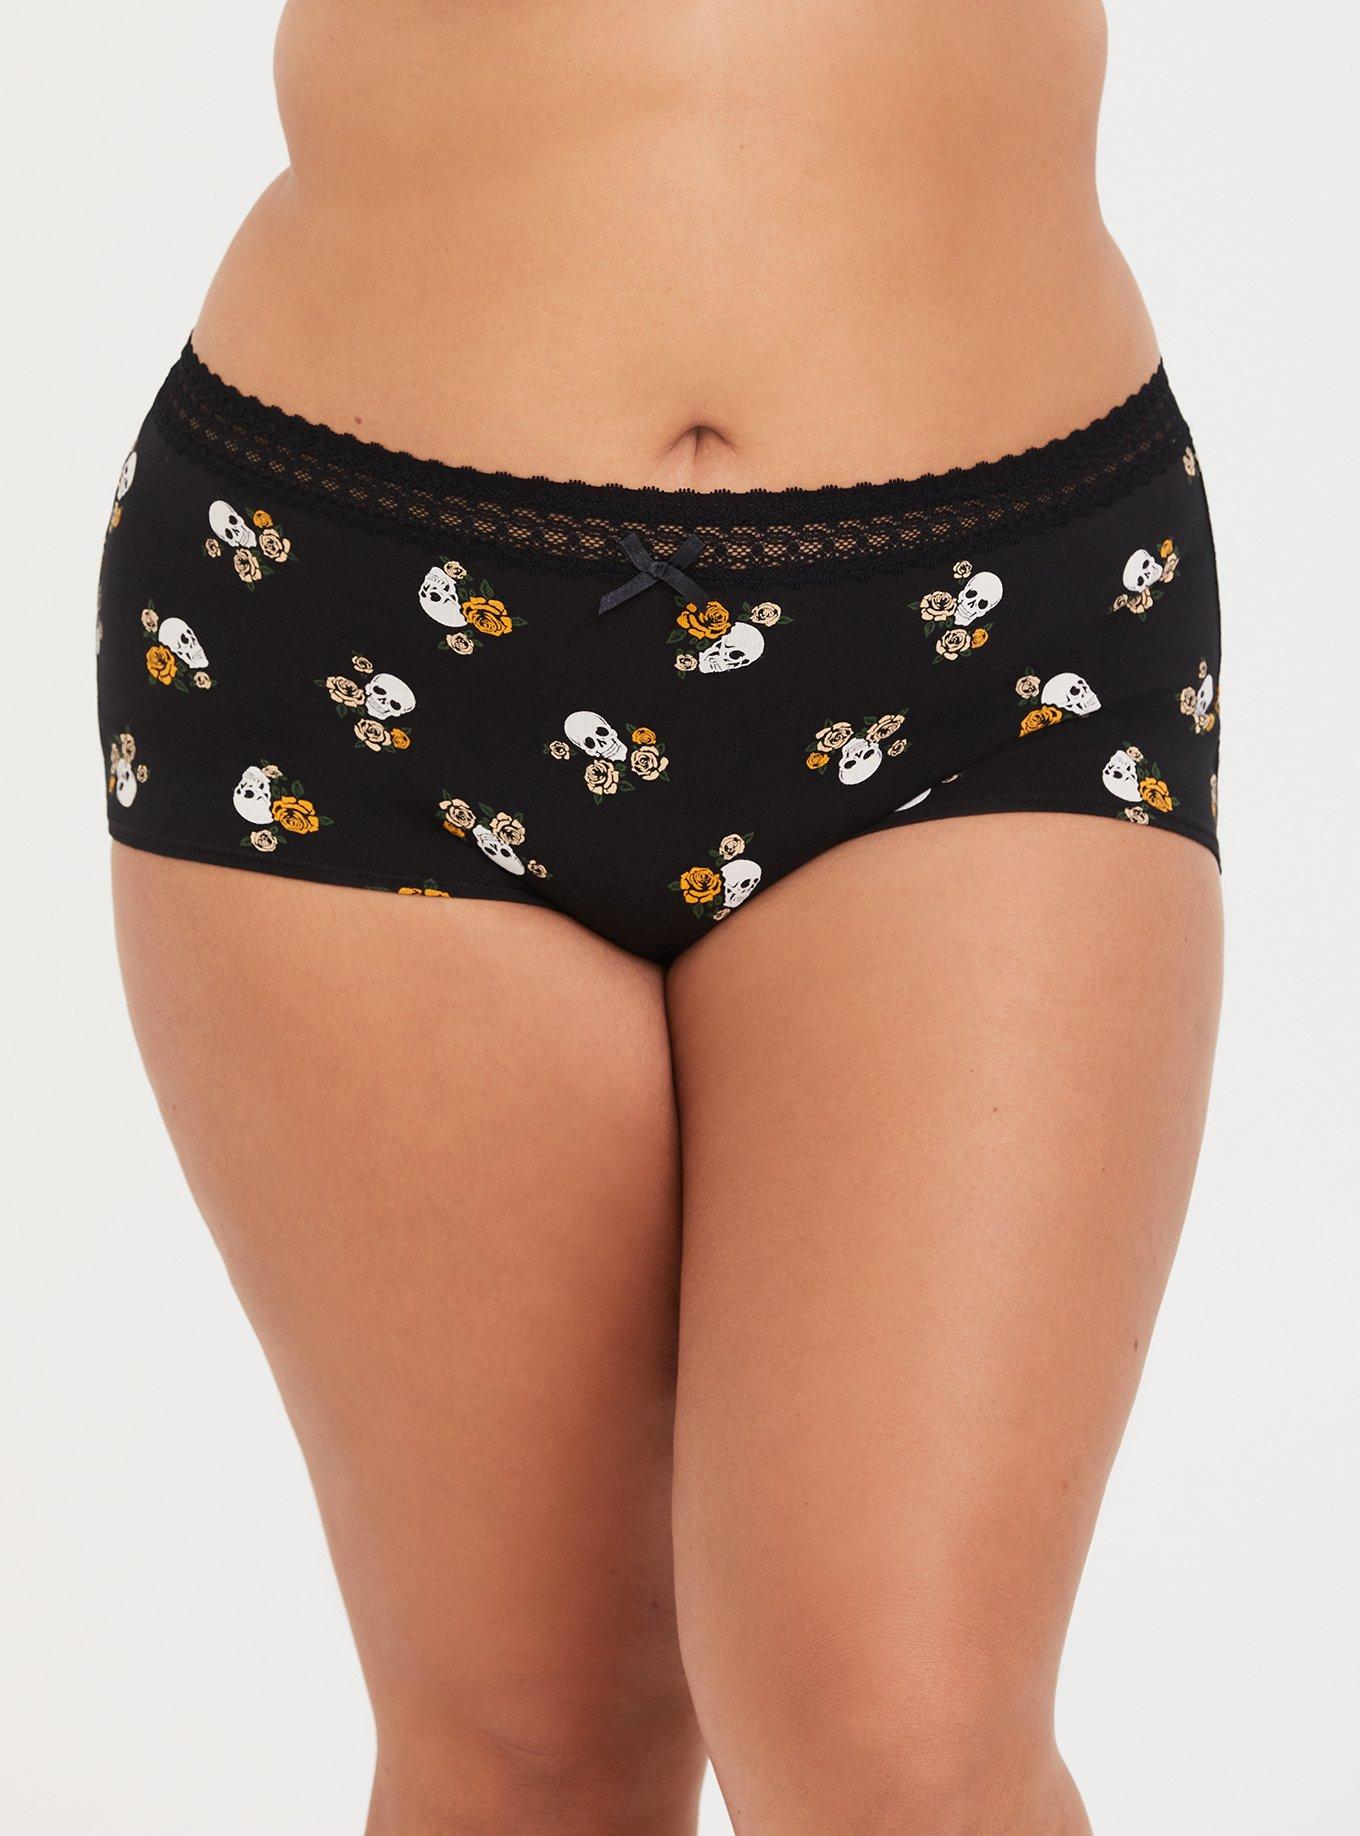 Womens Boxer Briefs by FOXERS, Black Panties, Comfy Undies, Sexy